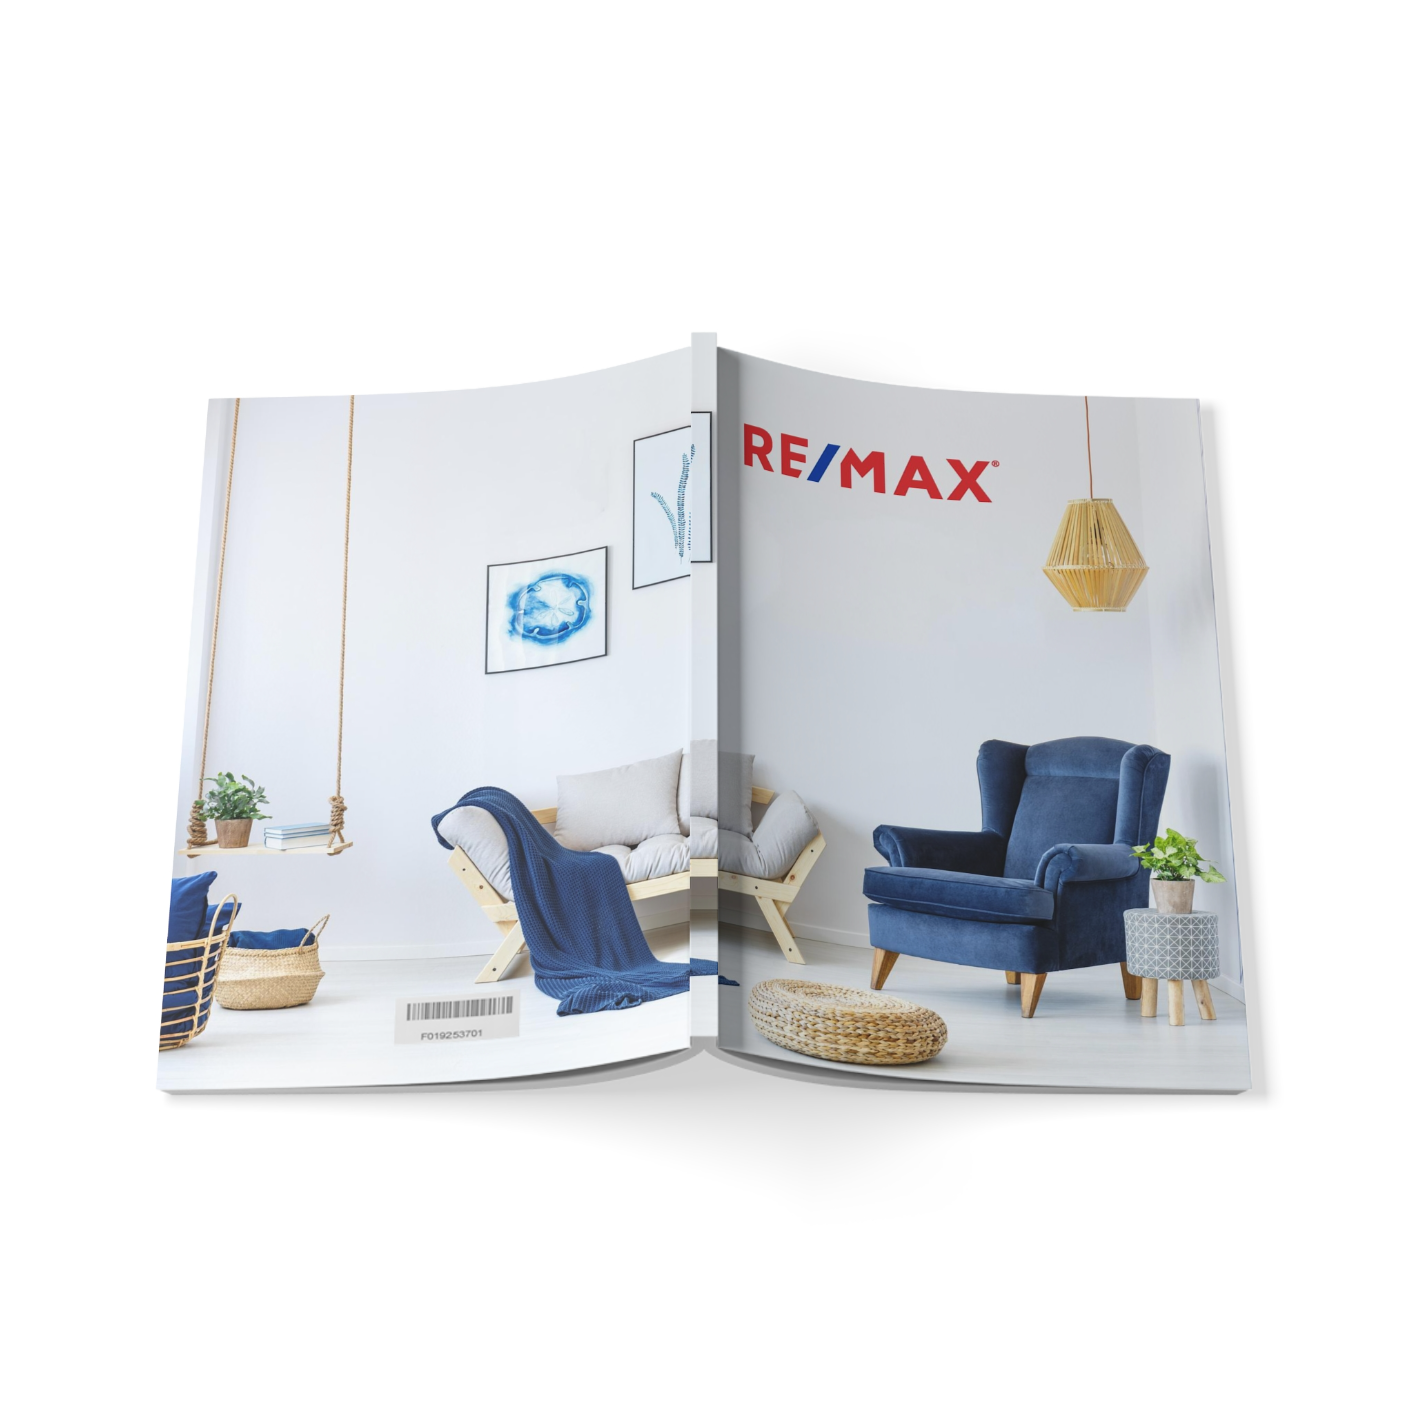 RE/MAX Full Color SoftCover Binders Interior (from as low as $6.18 per cover)